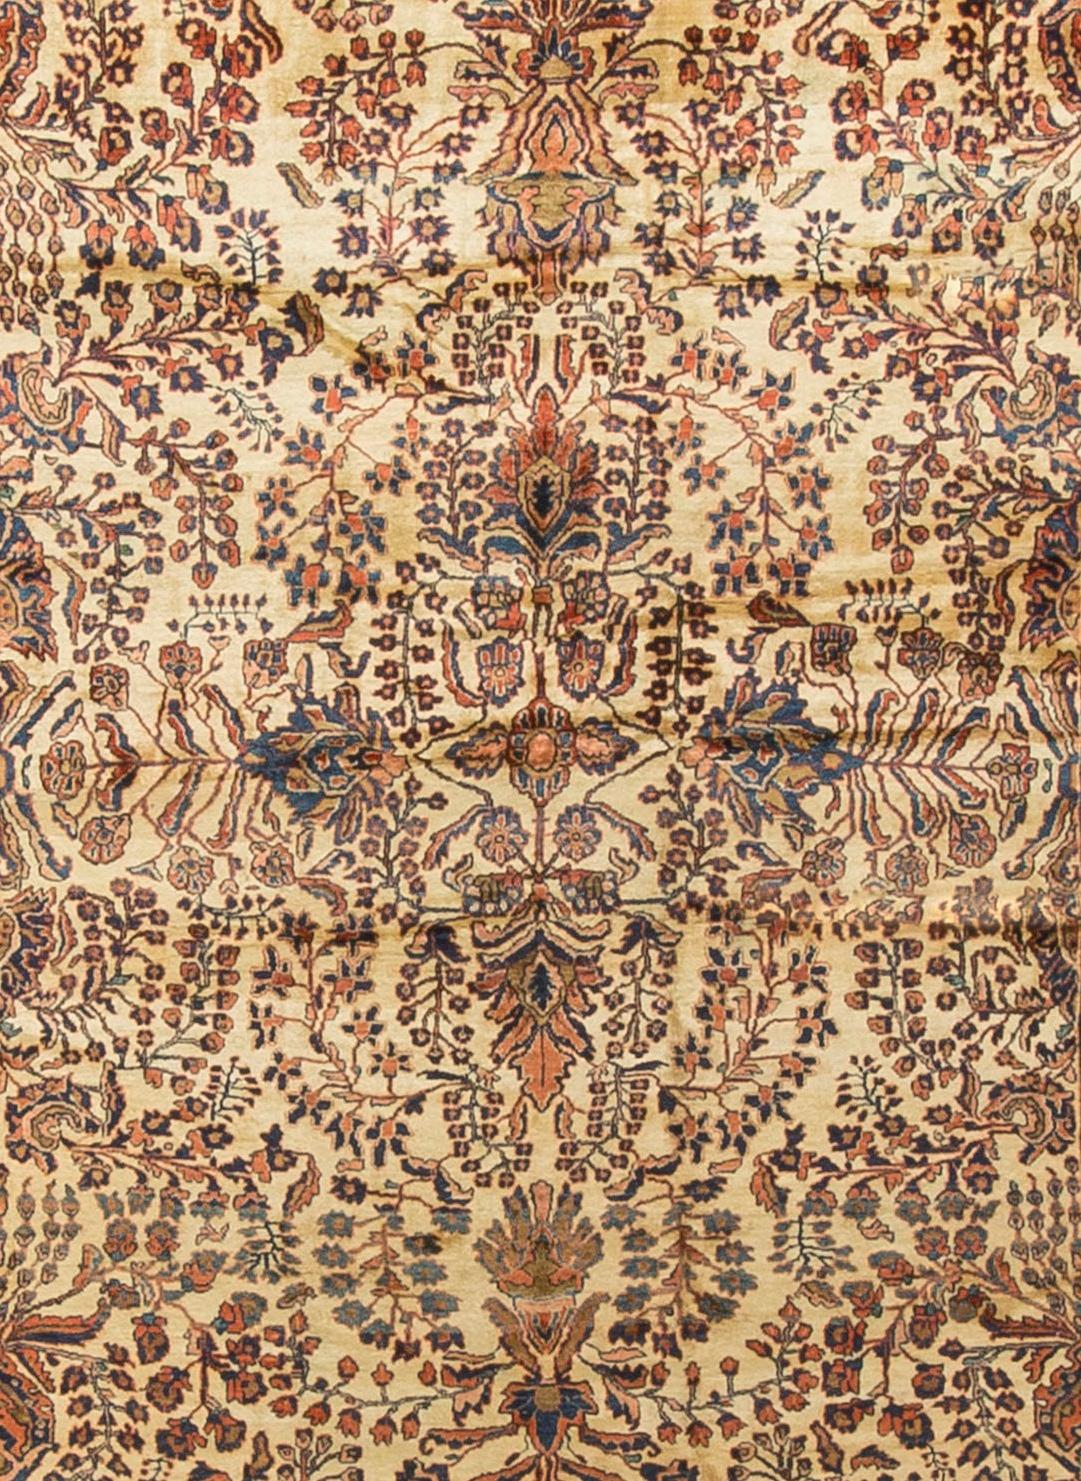 Antique Persian Sarouk Rug Circa 1900. The distinctive colors of this Sarouk rug reflects the style that became so popular in the USA at the beginning of the 20th century. The soft rust-red ground so well complimented by the floral patterns in blues